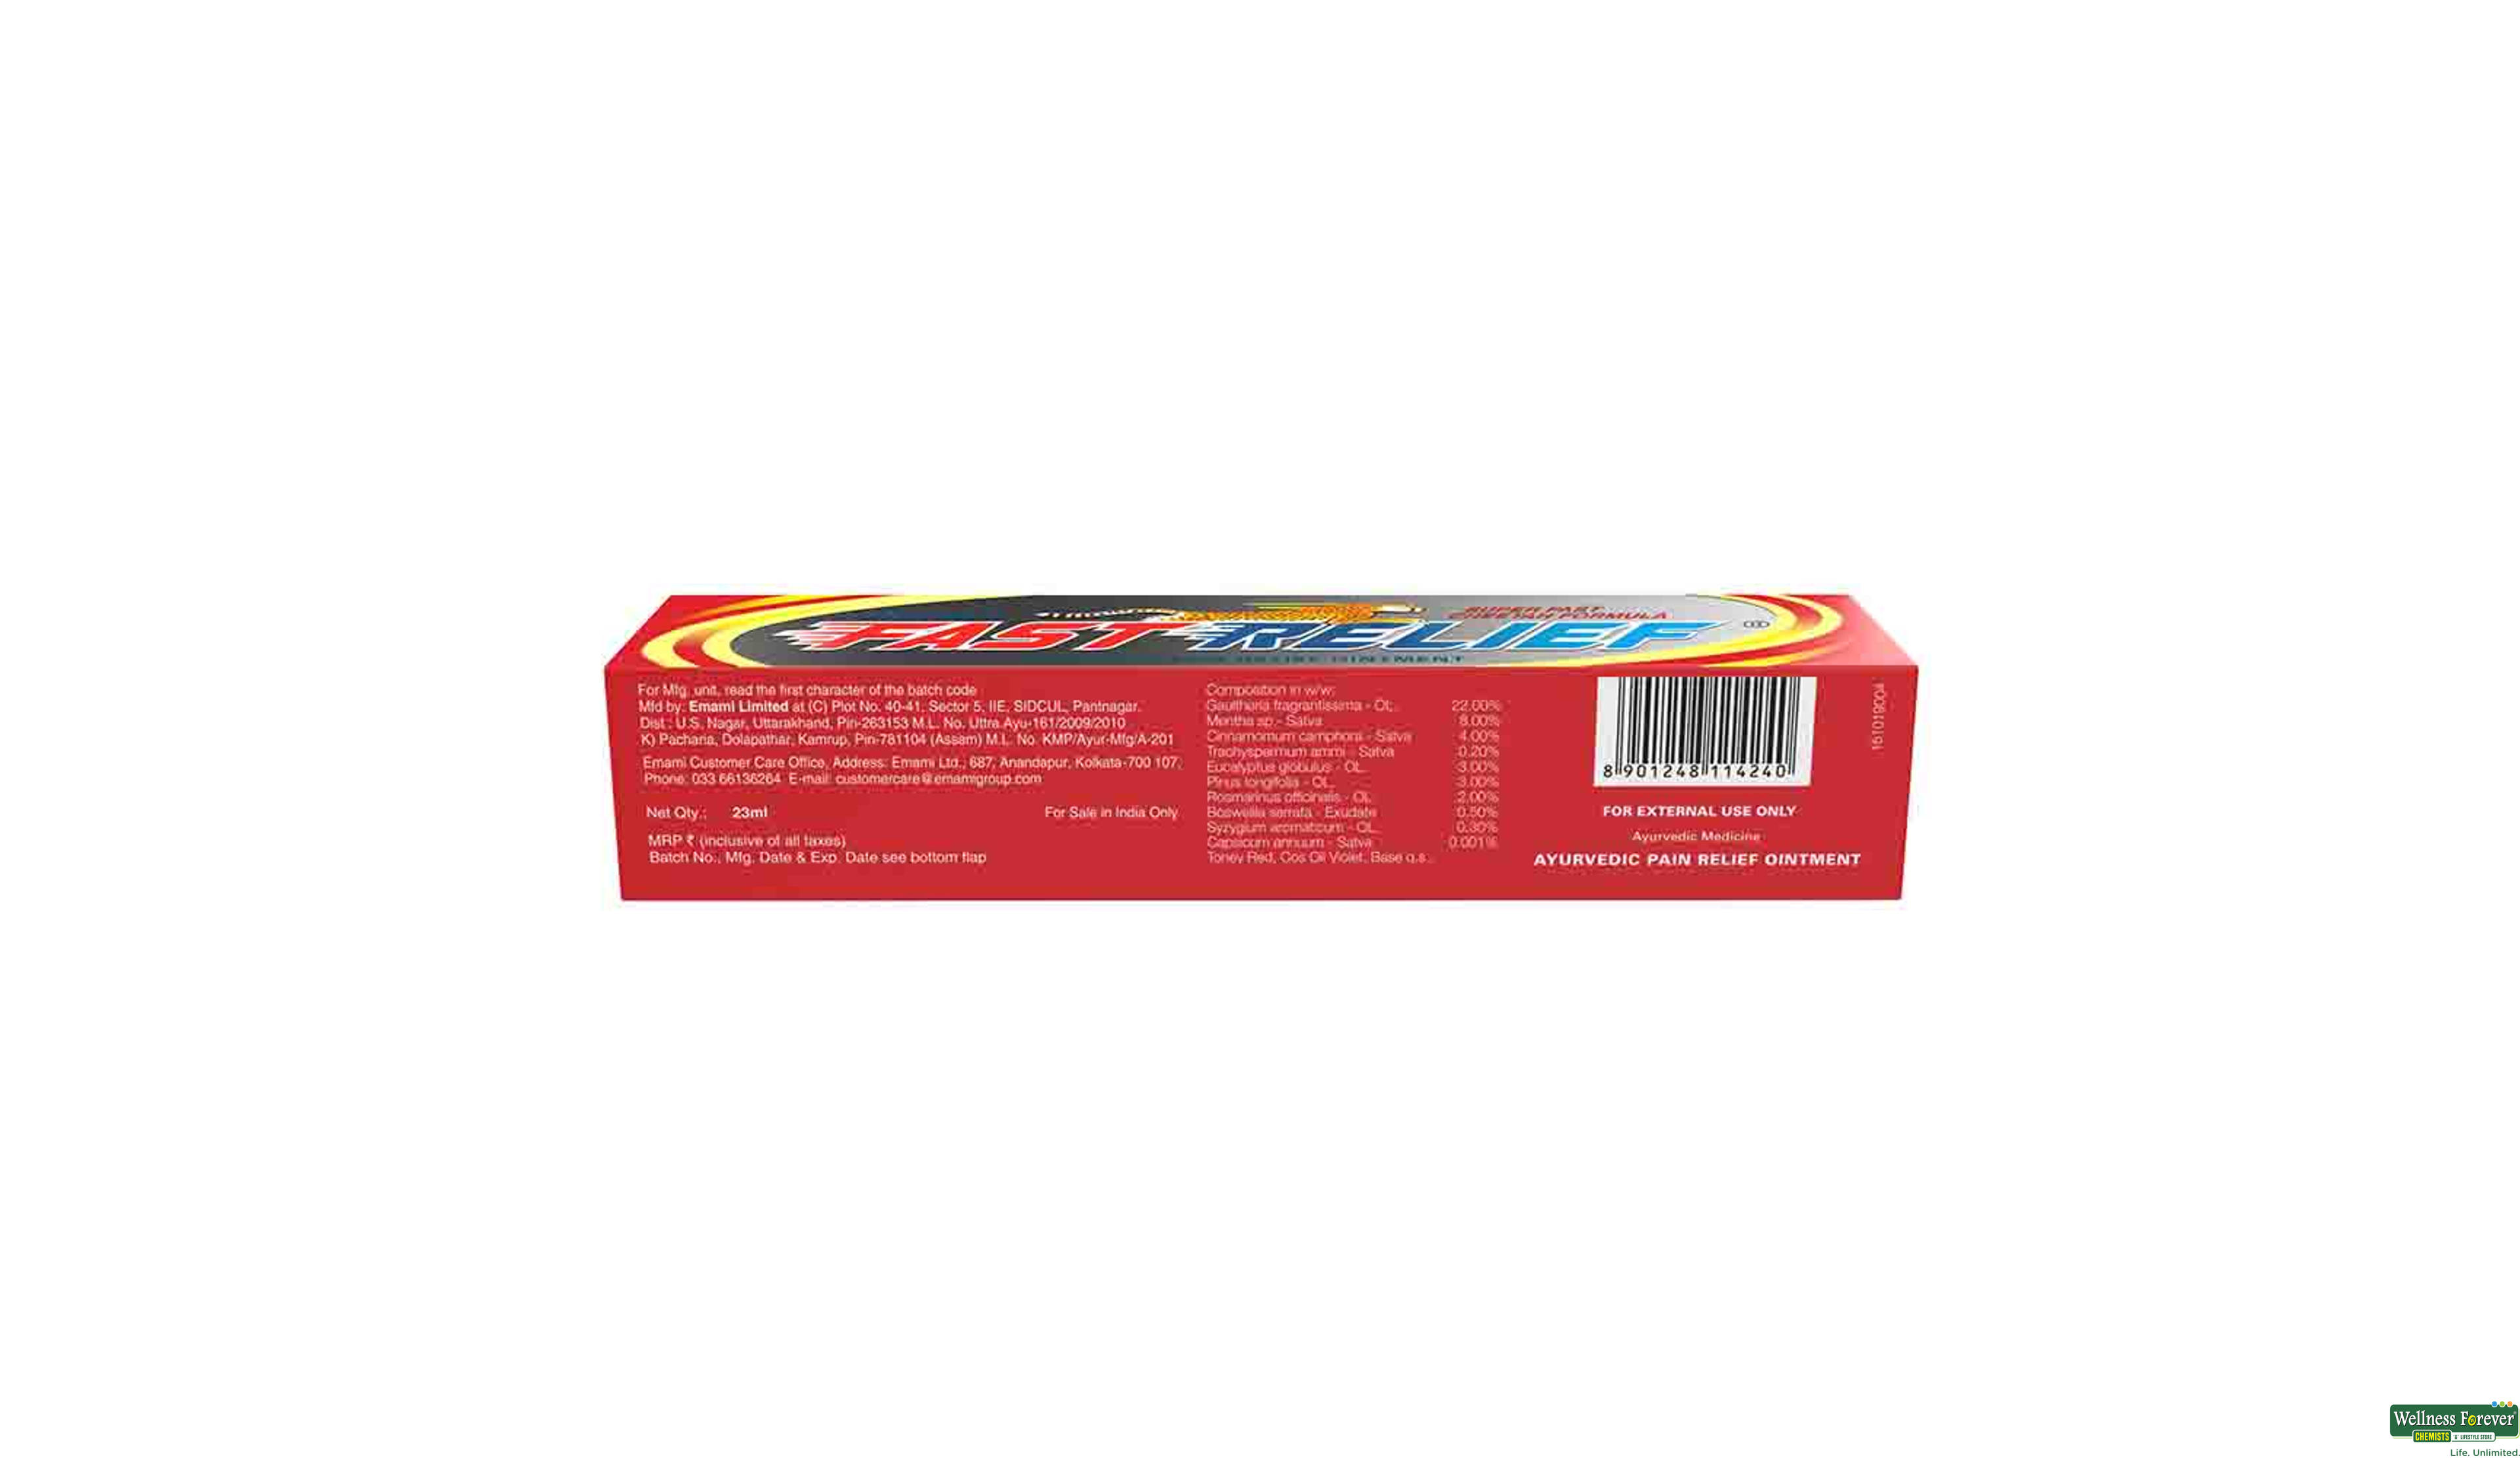 HIM CRM FAST RELIEF 23GM- 2, 23GM, 